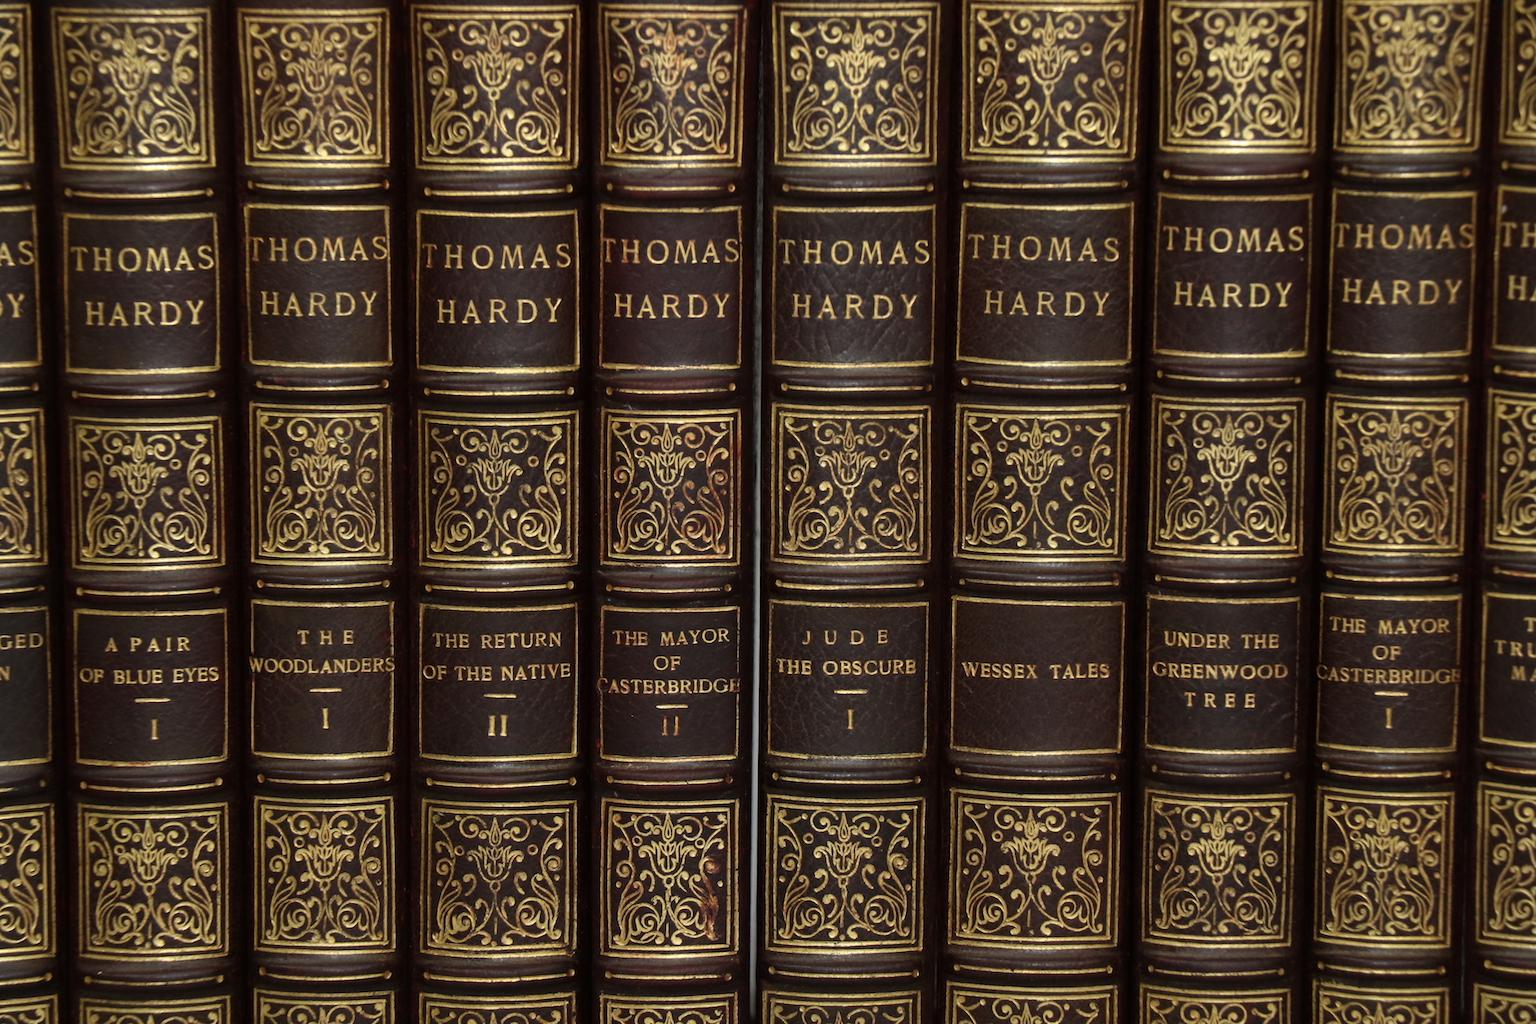 Dyed Books, The Works of Thomas Hardy Signed Mellstock Edition